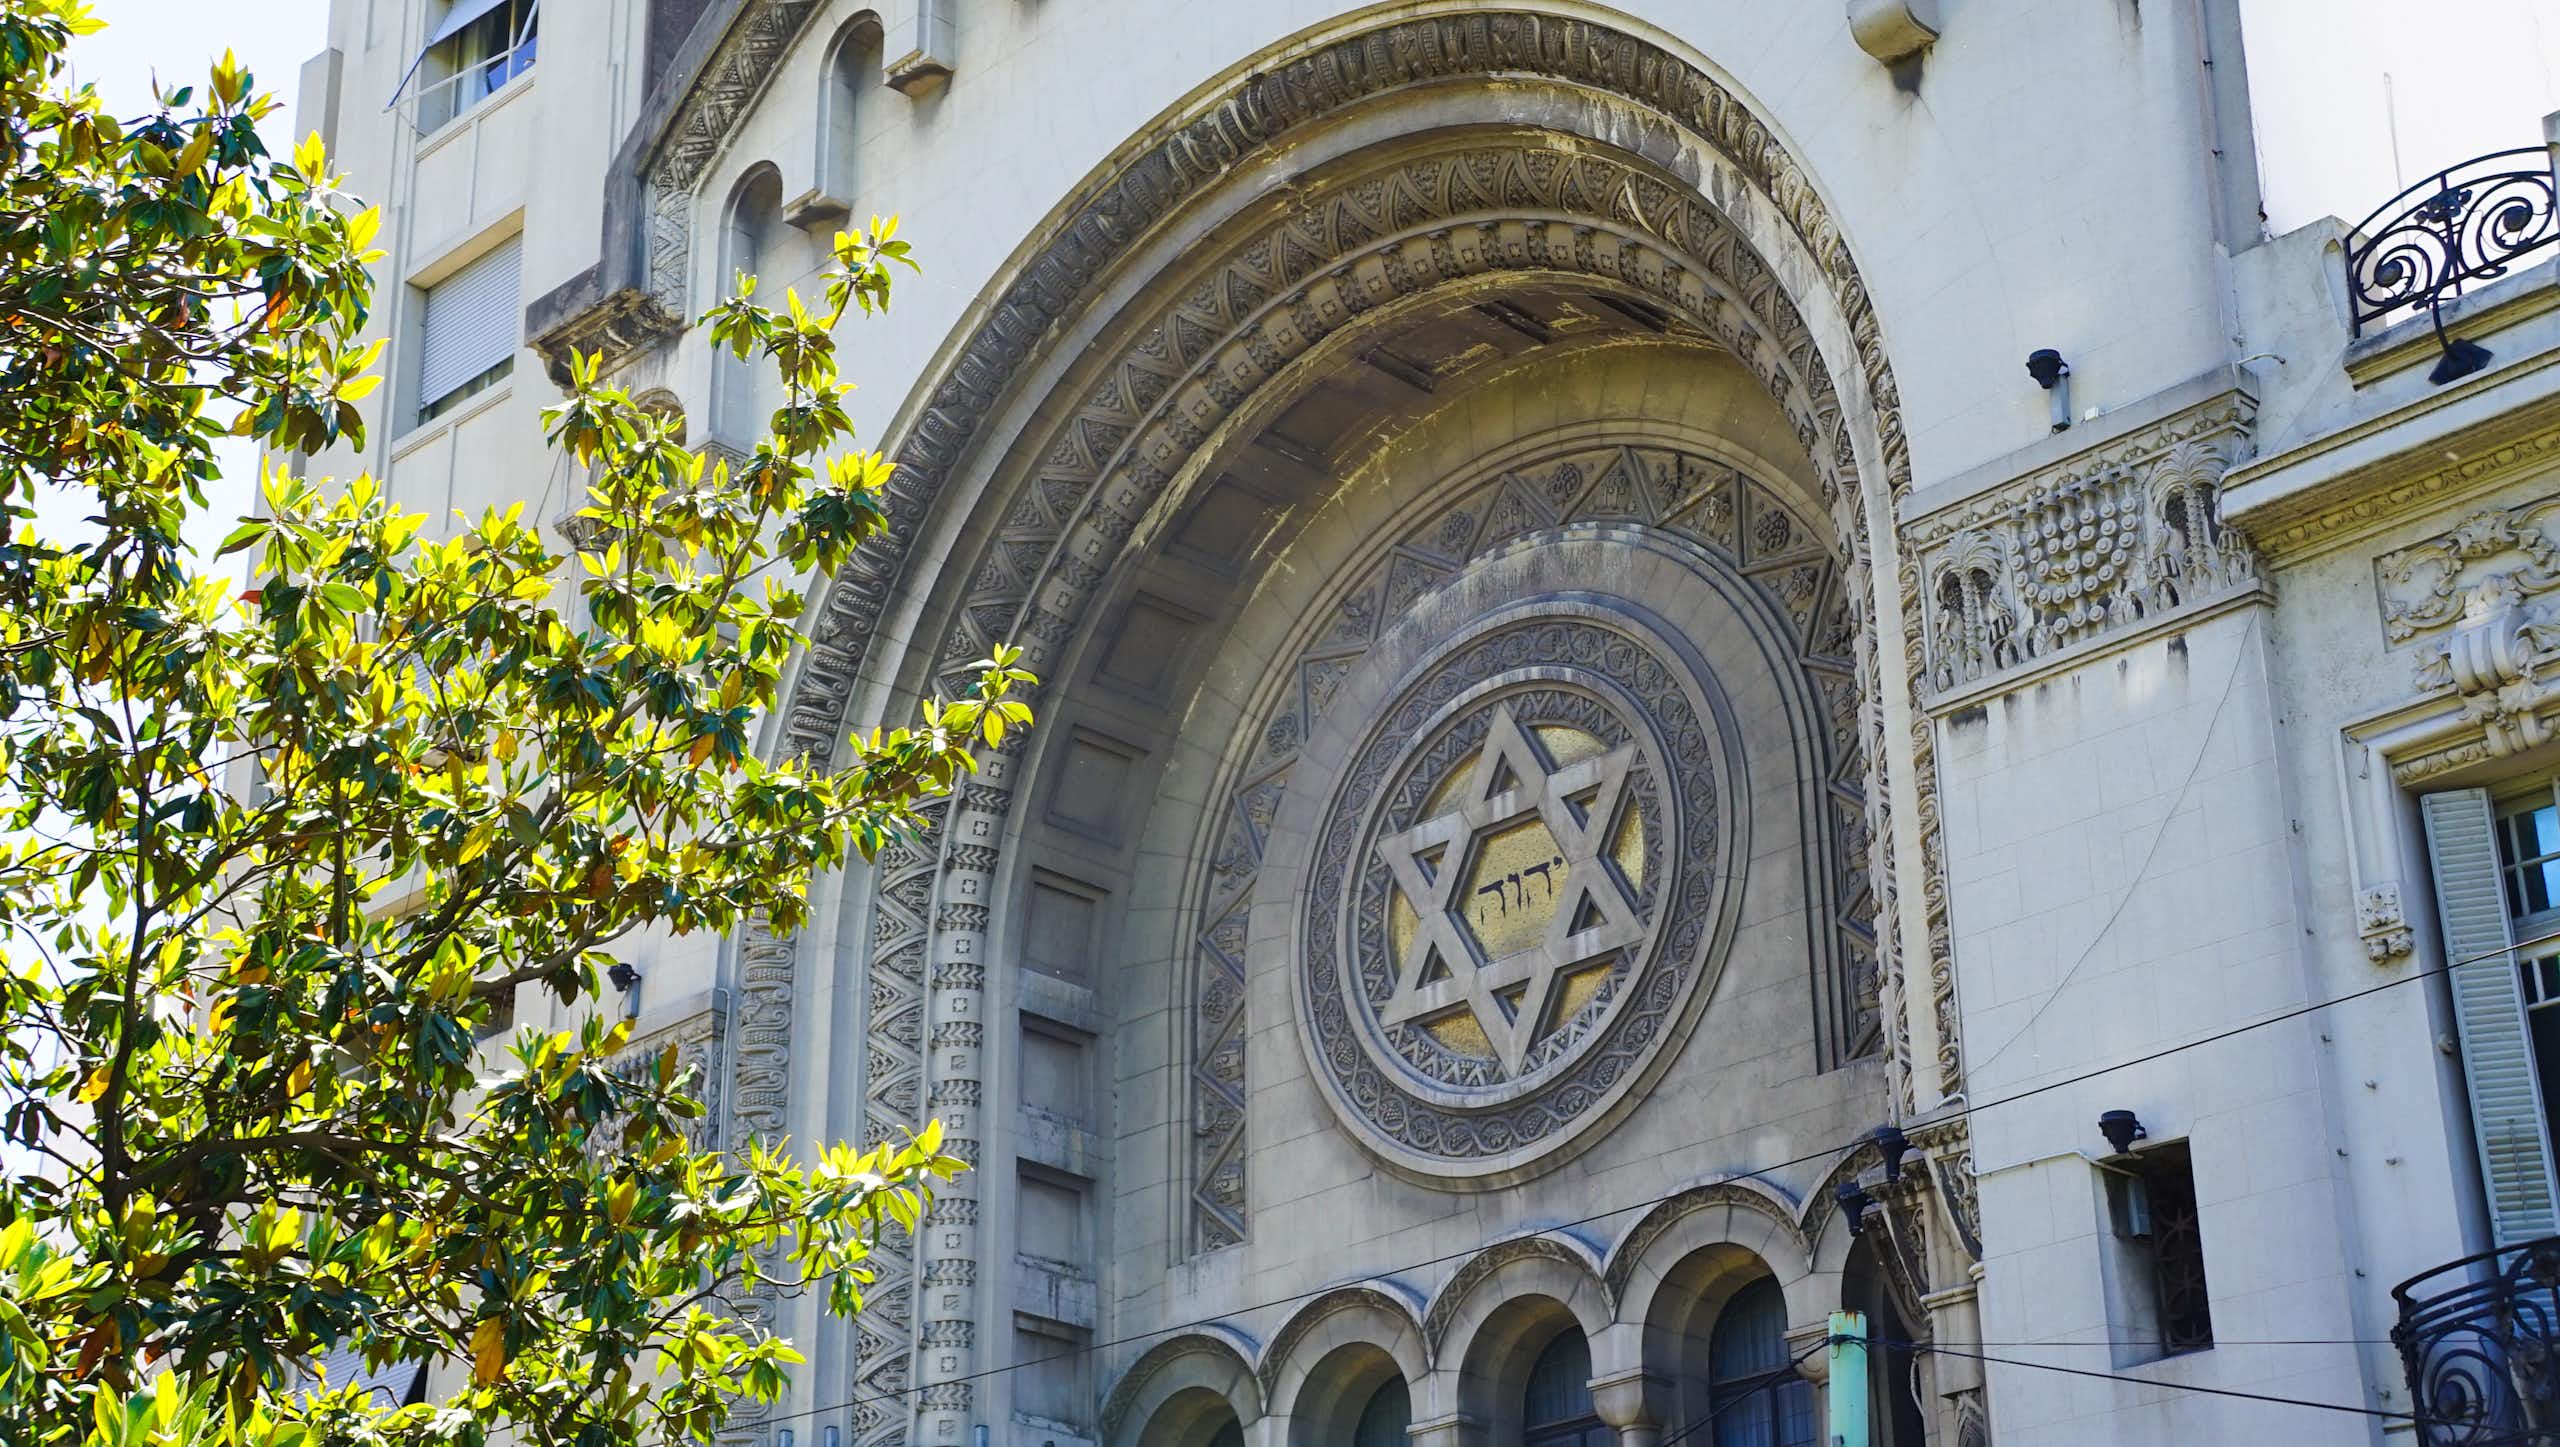 An archway featuring a star of david